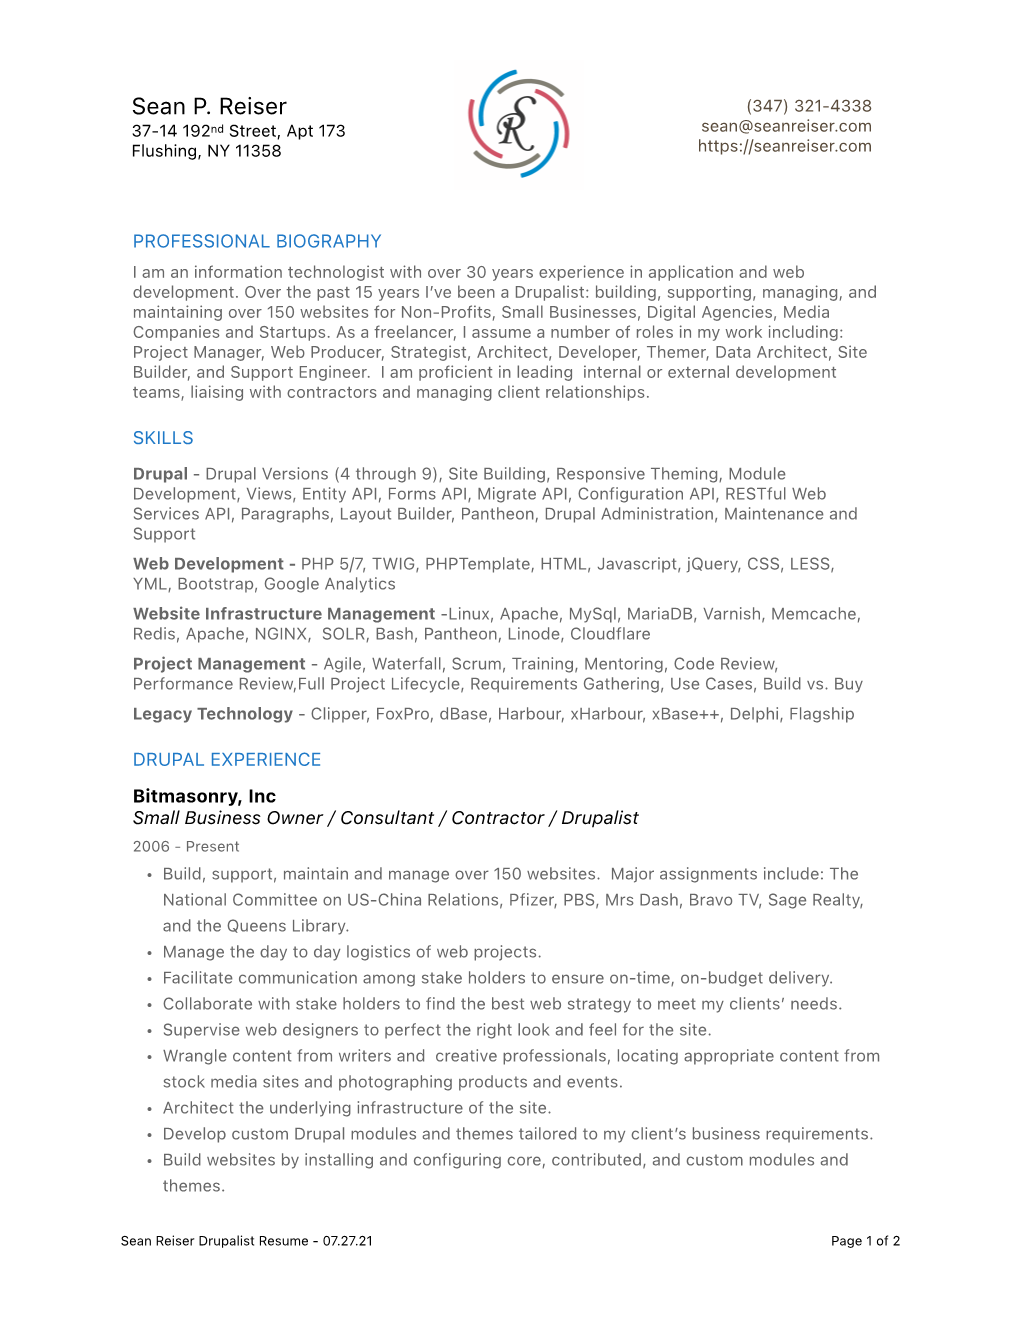 Drupalist Resume - 07.27.21 Page 1 of 2 • Review and Test the Work of Developers, Designers, Engineers, and Other Subcontractors